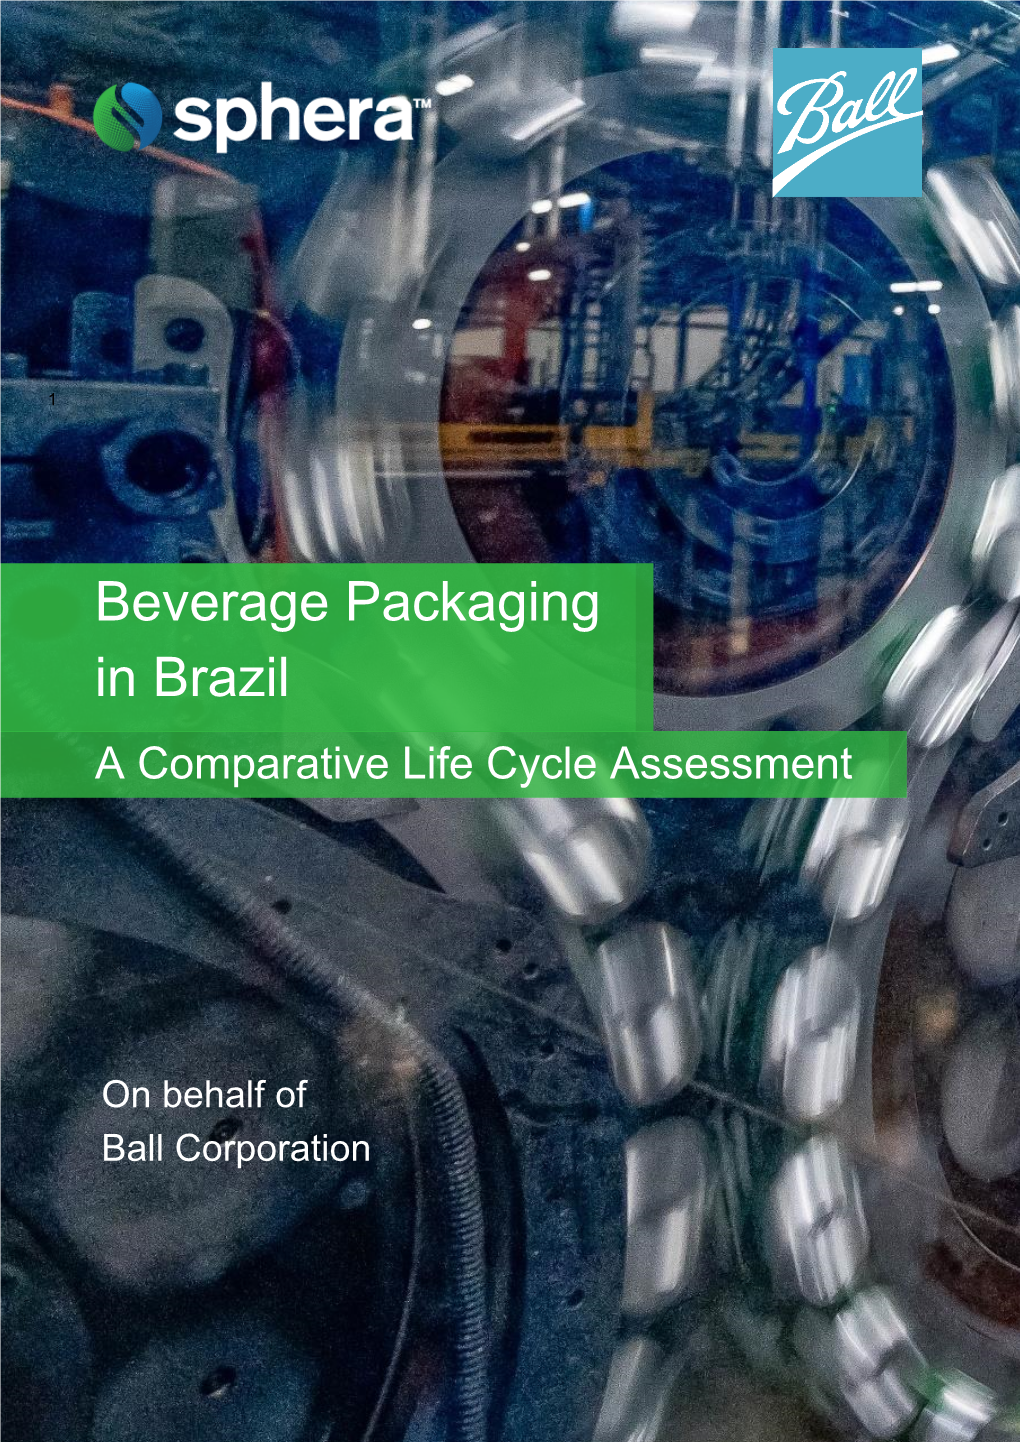 Beverage Packaging in Brazil a Comparative Life Cycle Assessment